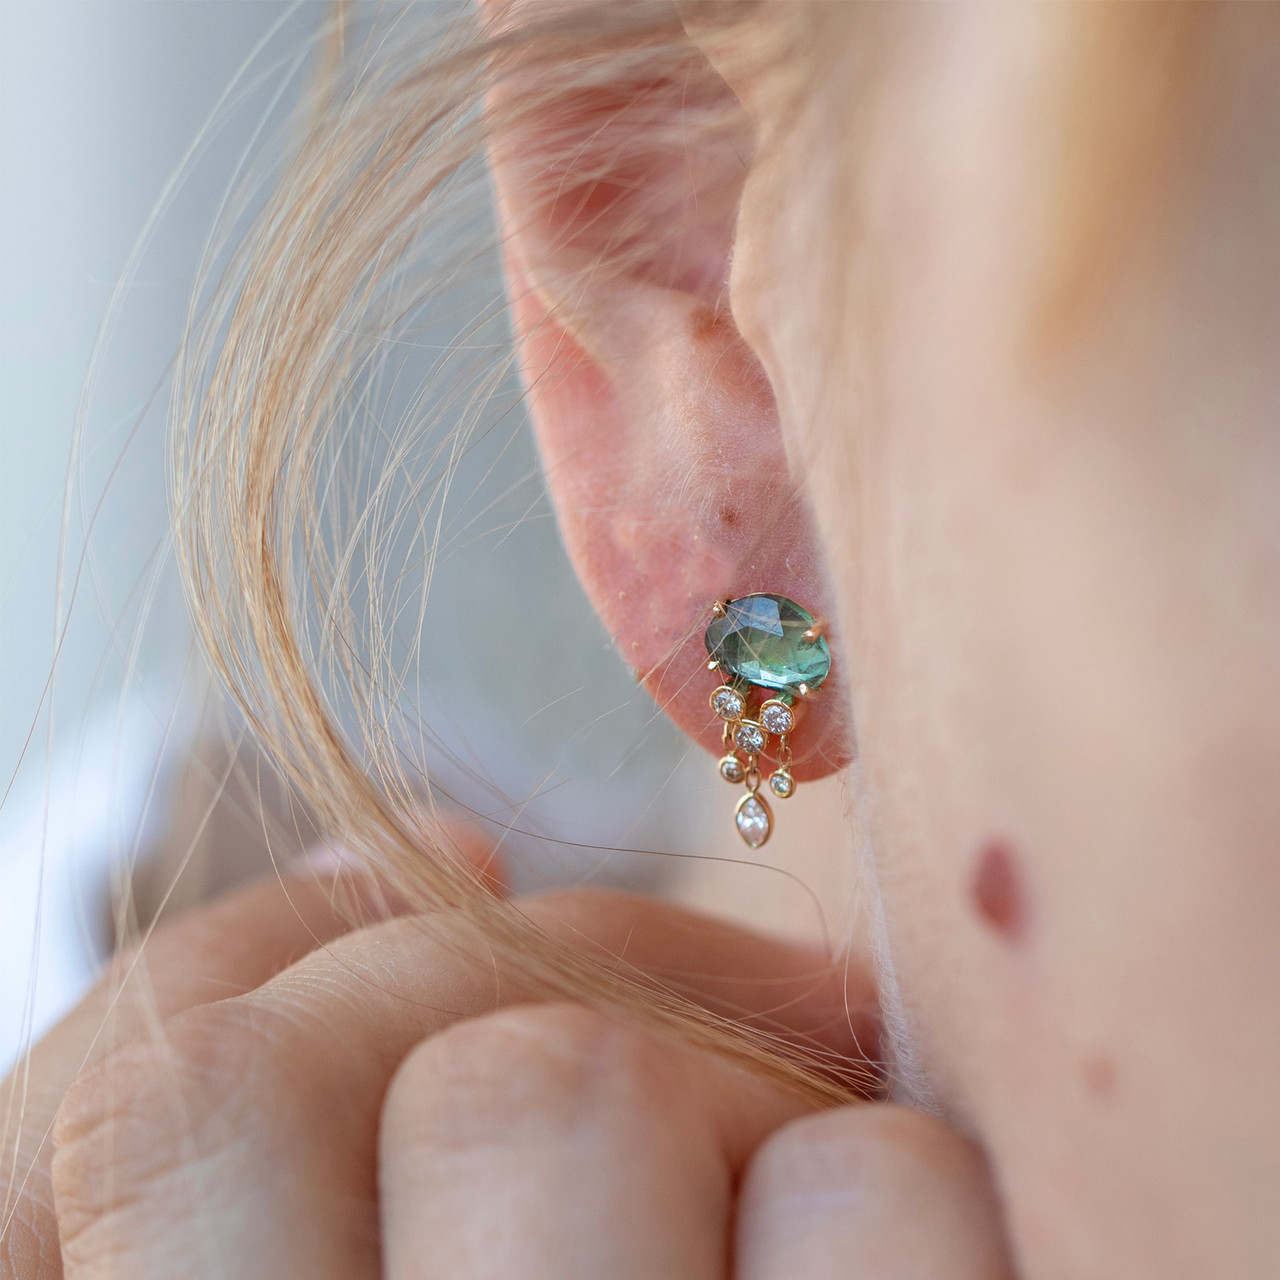 One-Of-A-Kind Jellyfish Green Tourmaline & Diamond Earring, Celine Daoust, tomfoolery